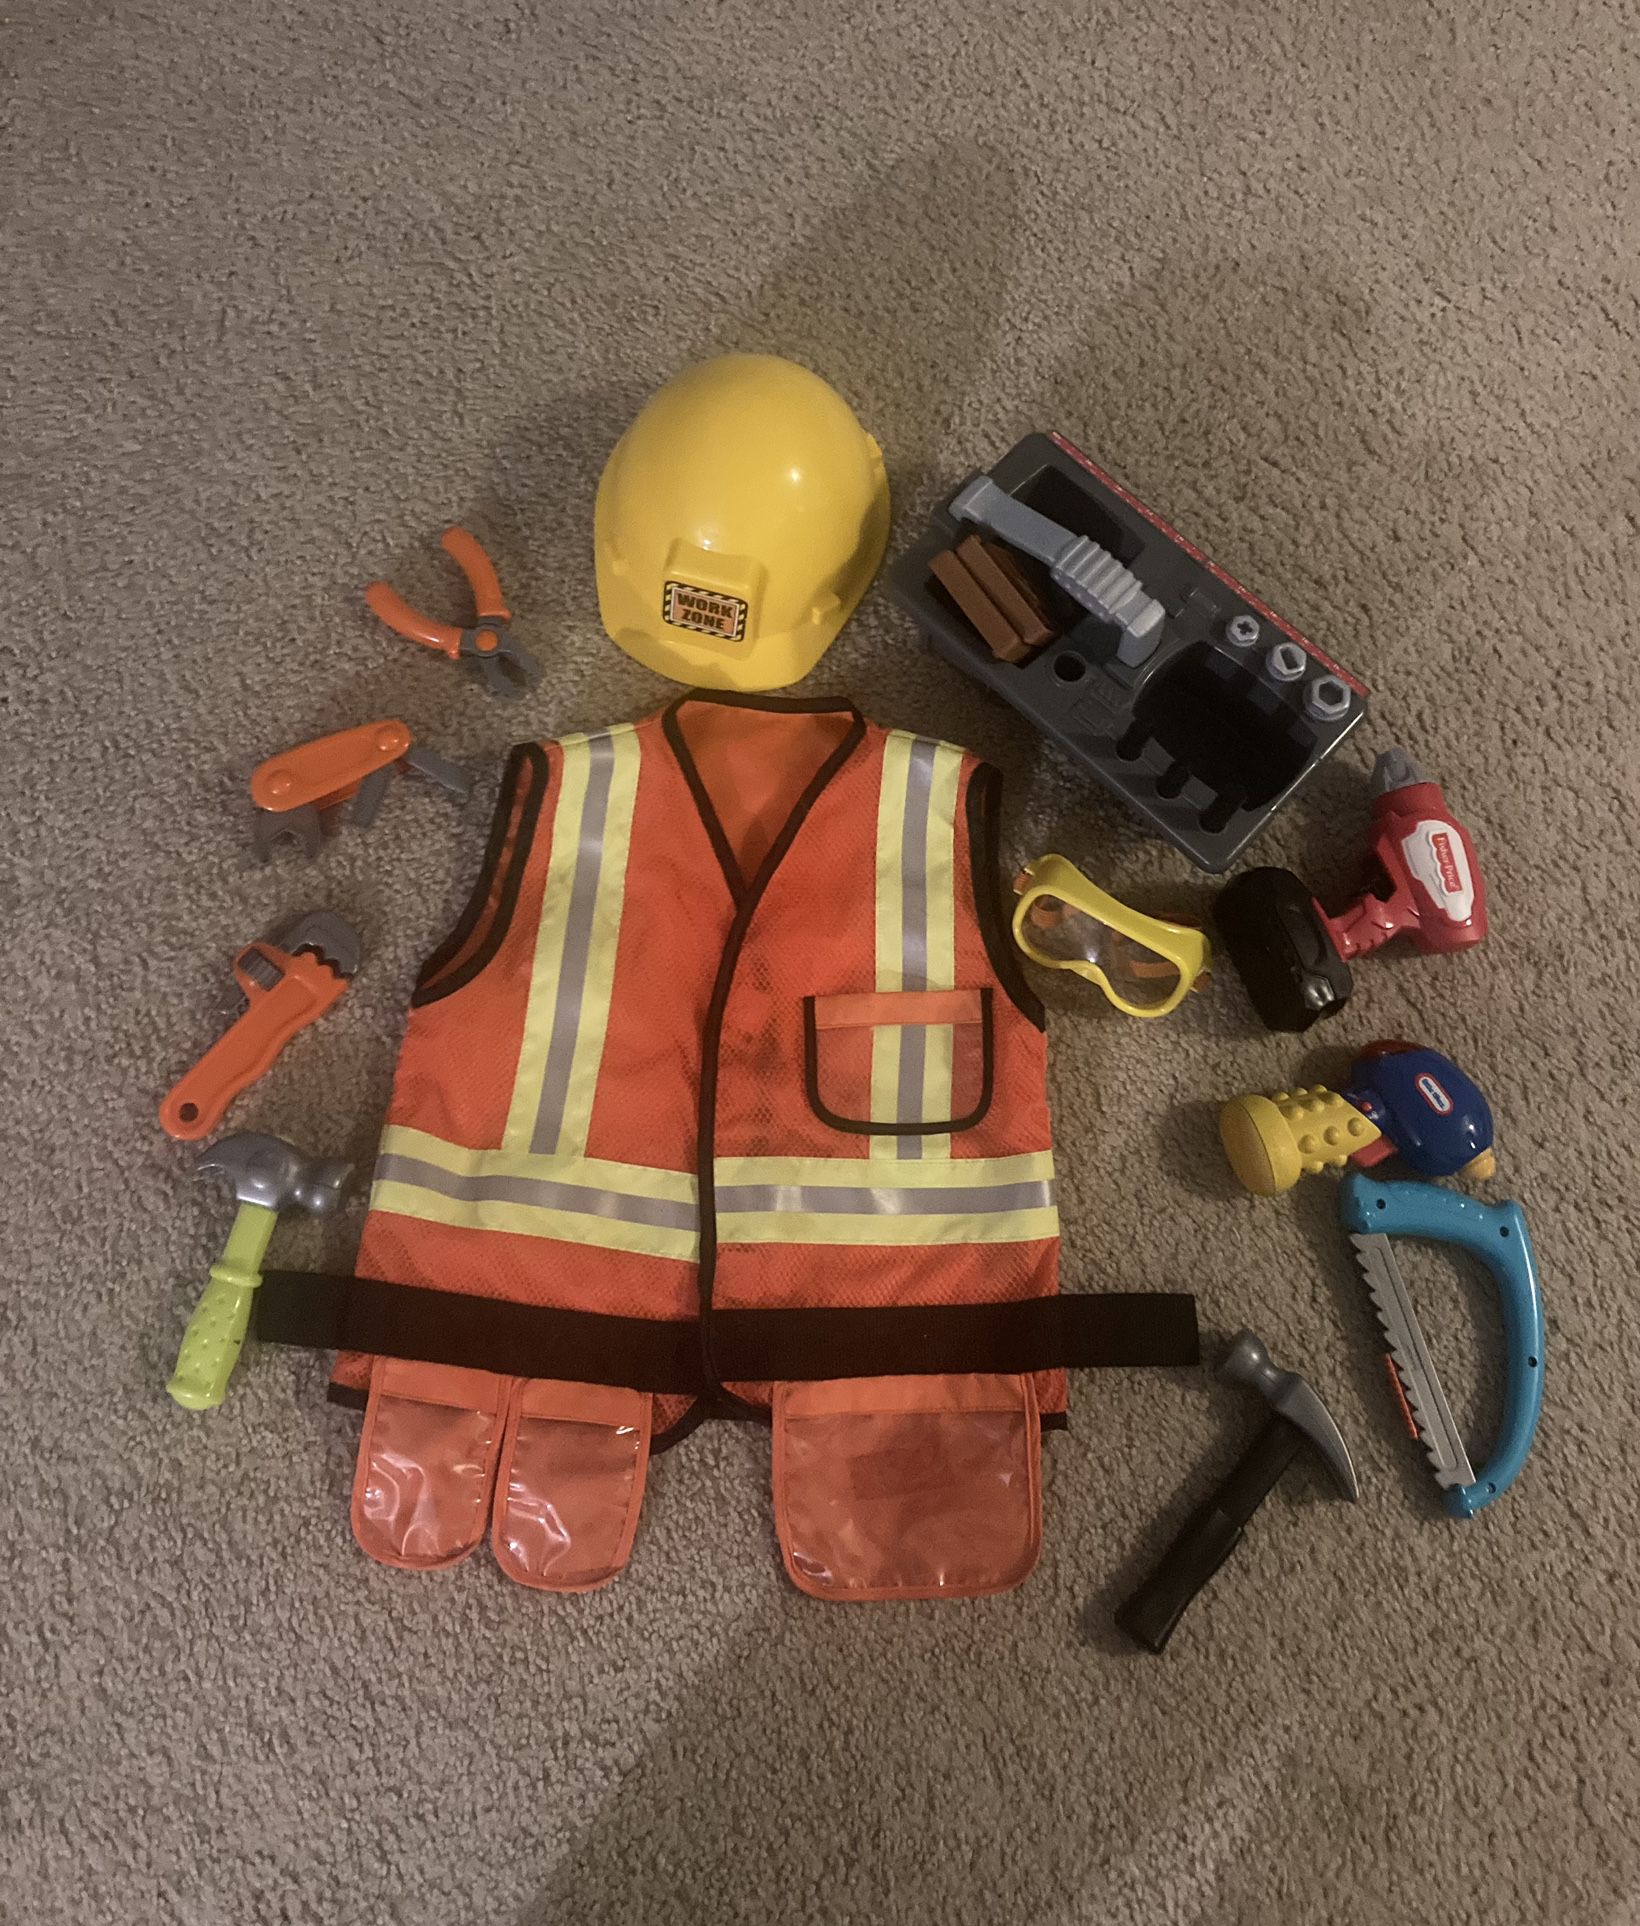 Construction Costume And Tools